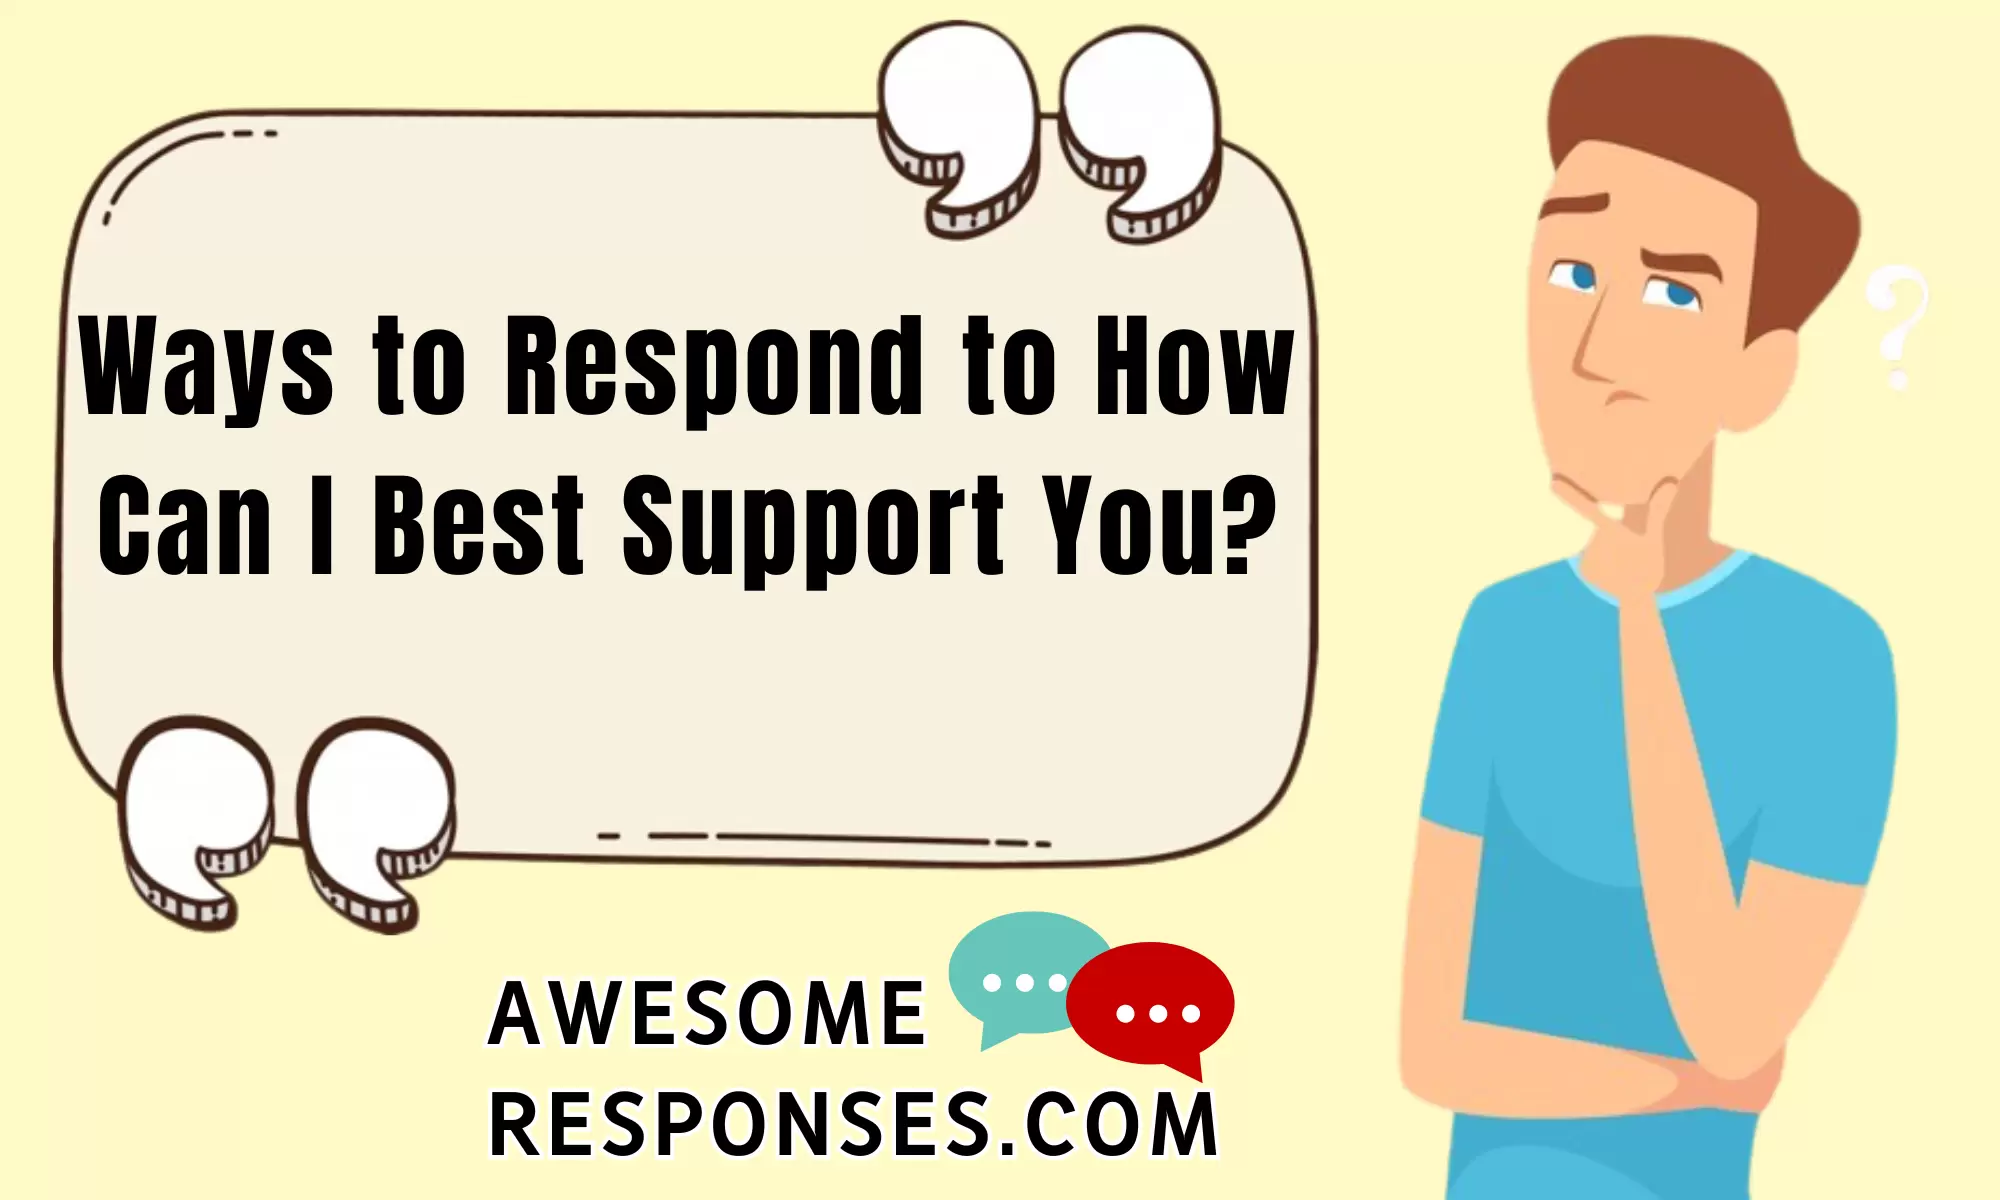 Ways to Respond to How Can I Best Support You?